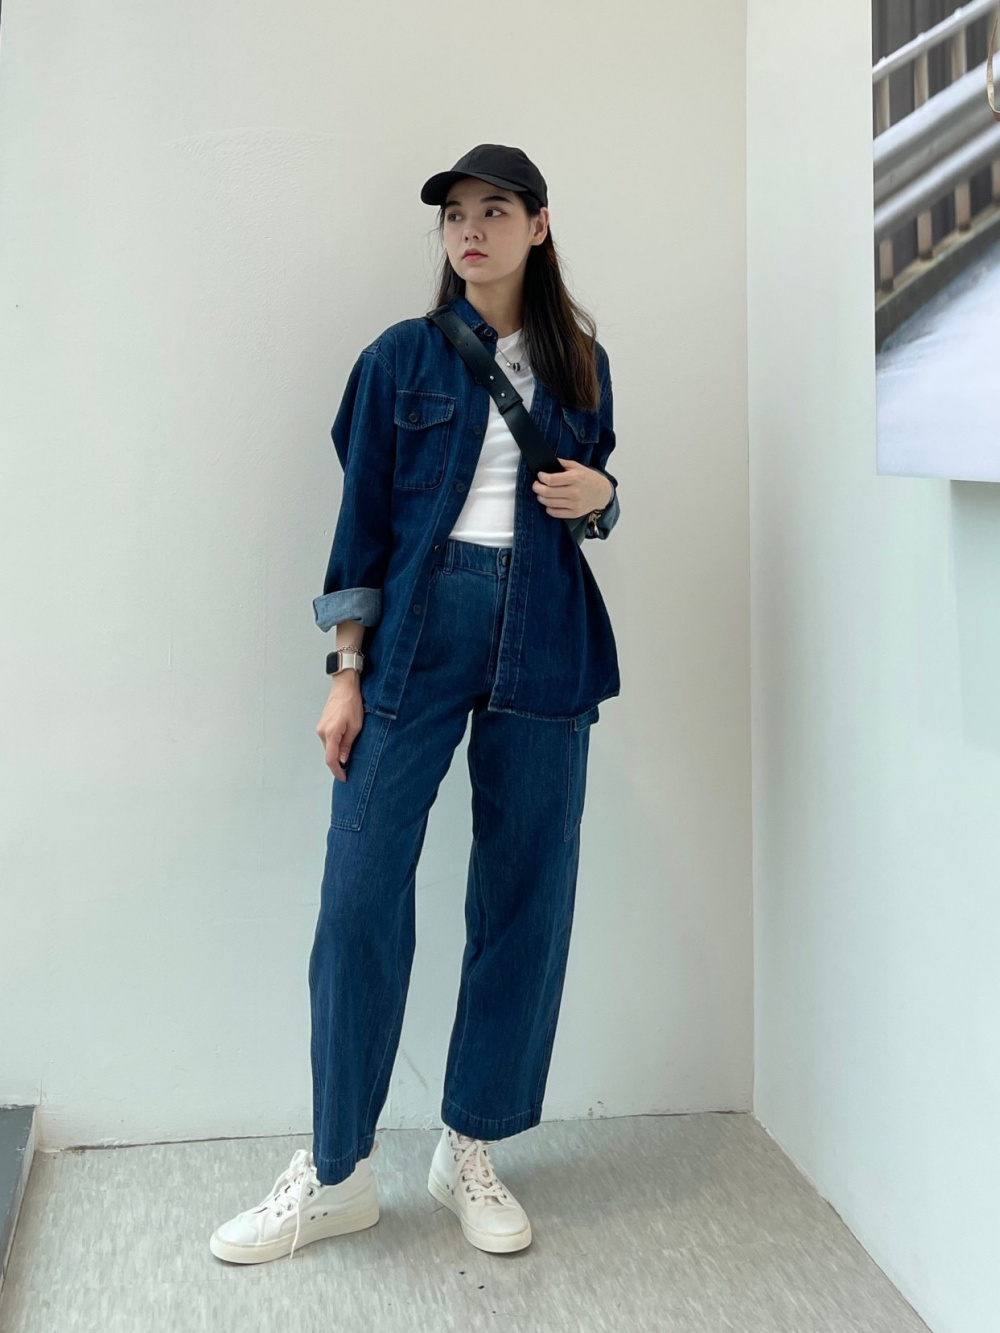 Check styling ideas for「Denim Jersey Long Sleeve Over Shirt、Denim Wide ...